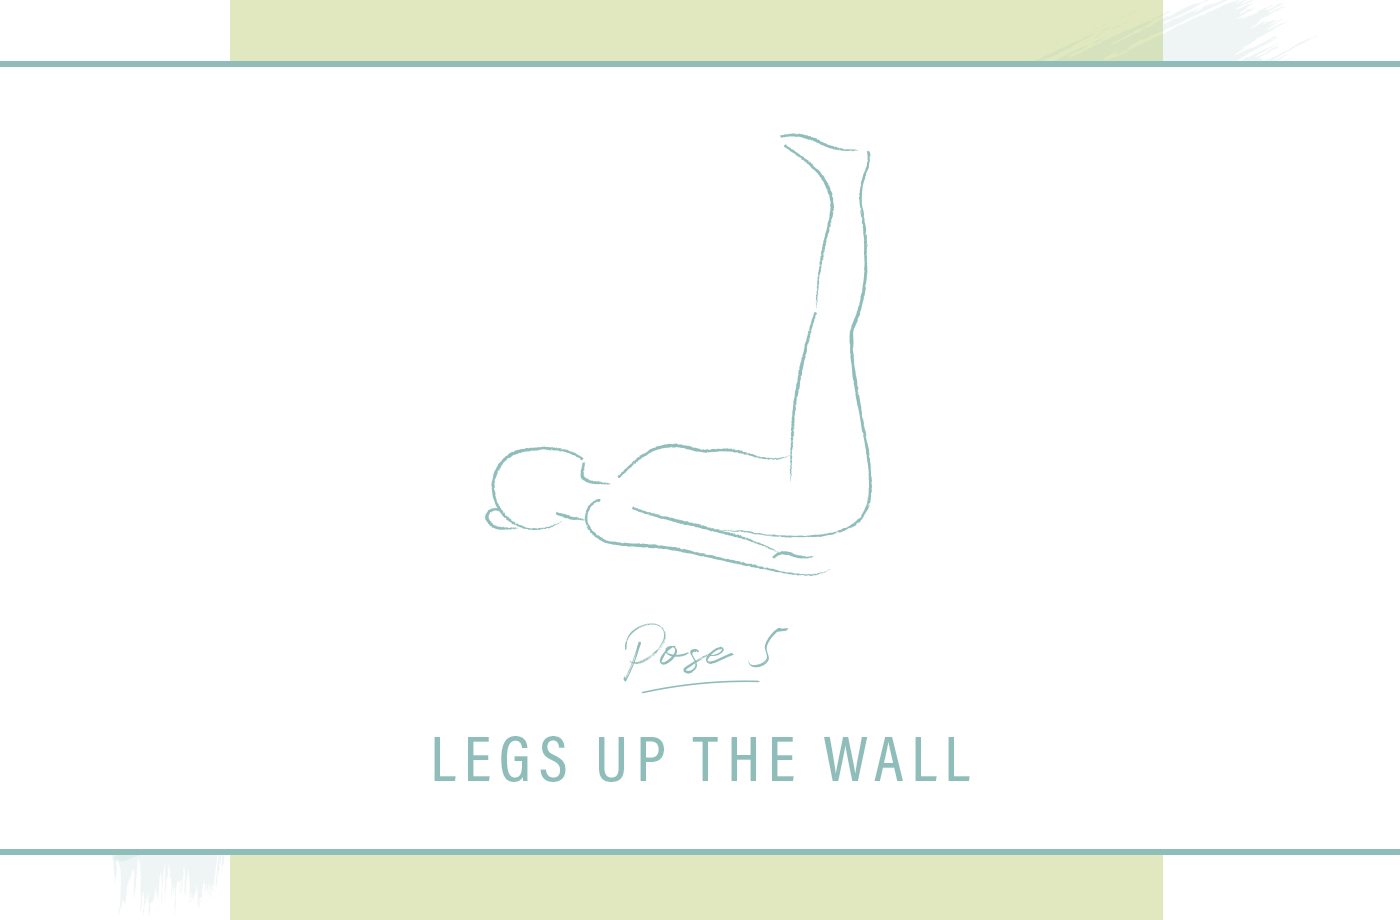 Legs up the wall